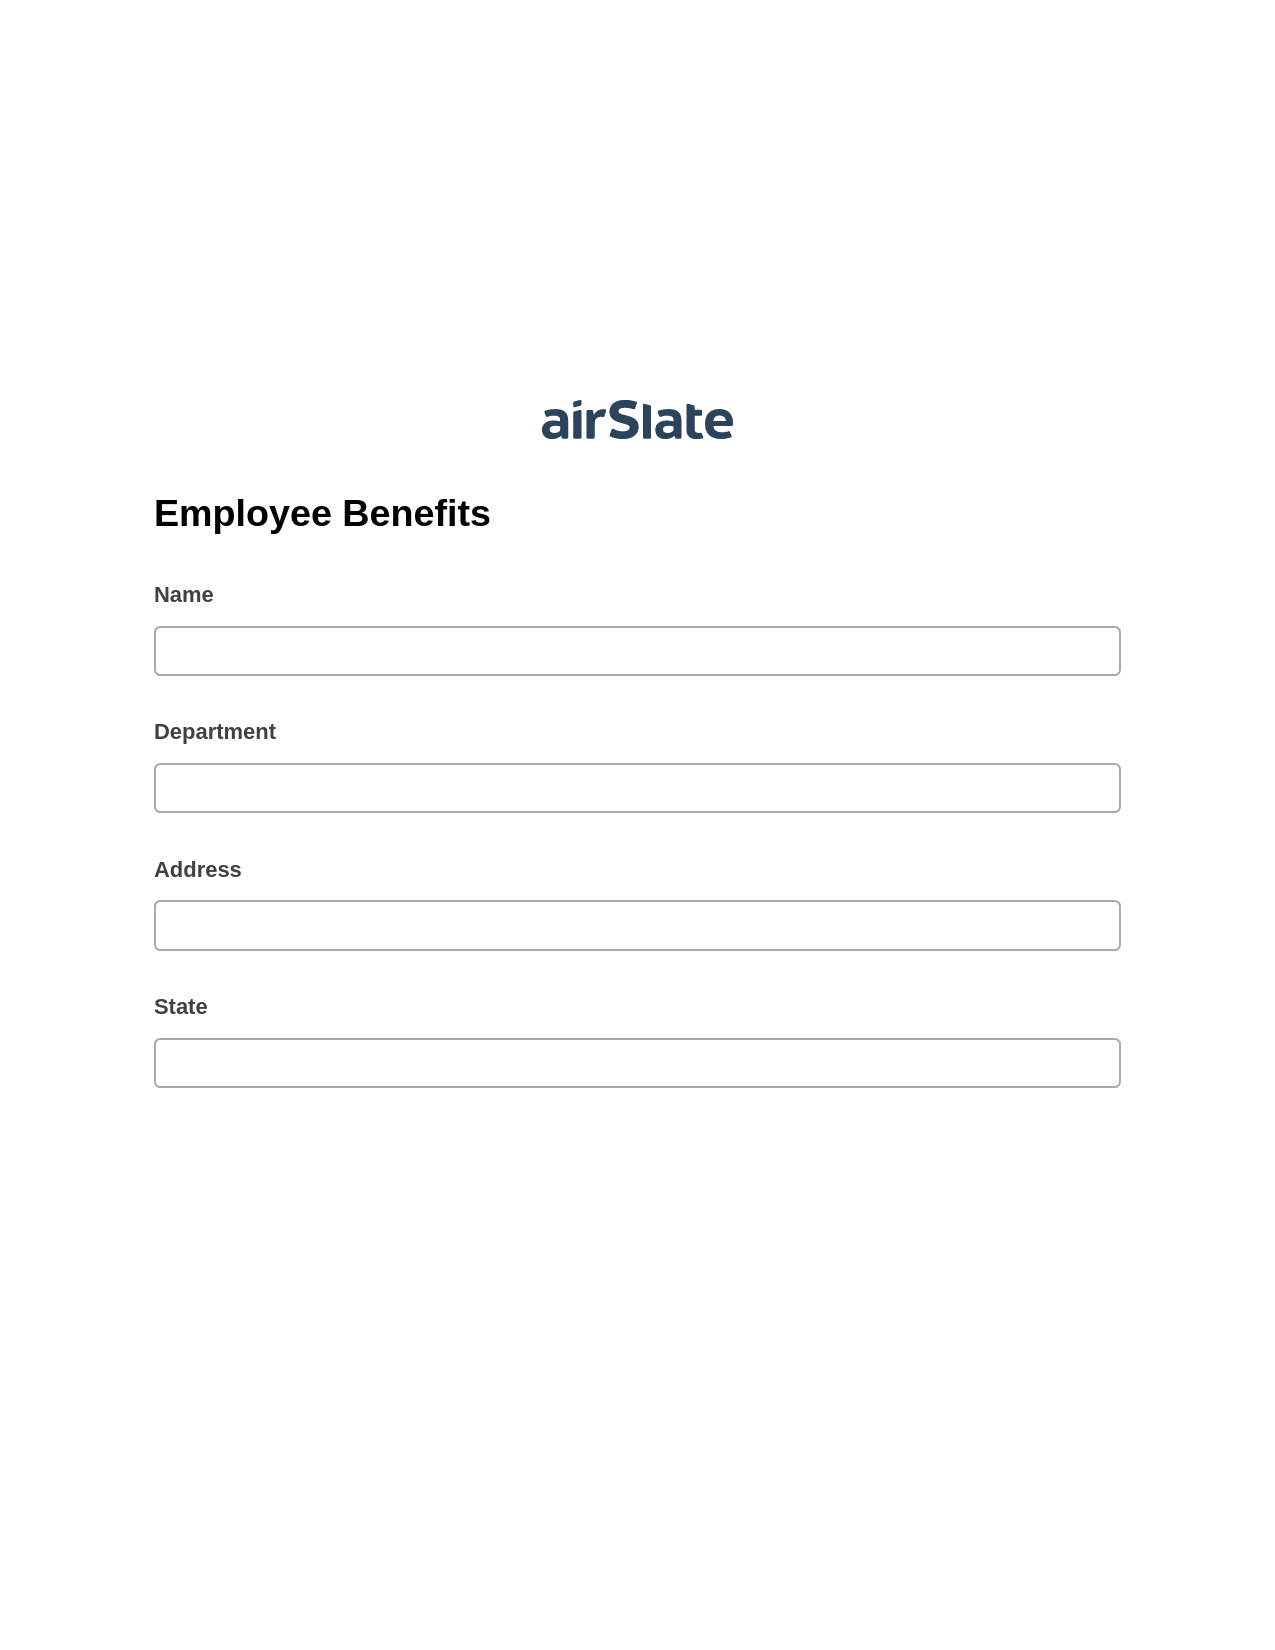 Employee Benefits Pre-fill Slate from MS Dynamics 365 Records Bot, Email Notification Bot, Webhook Postfinish Bot